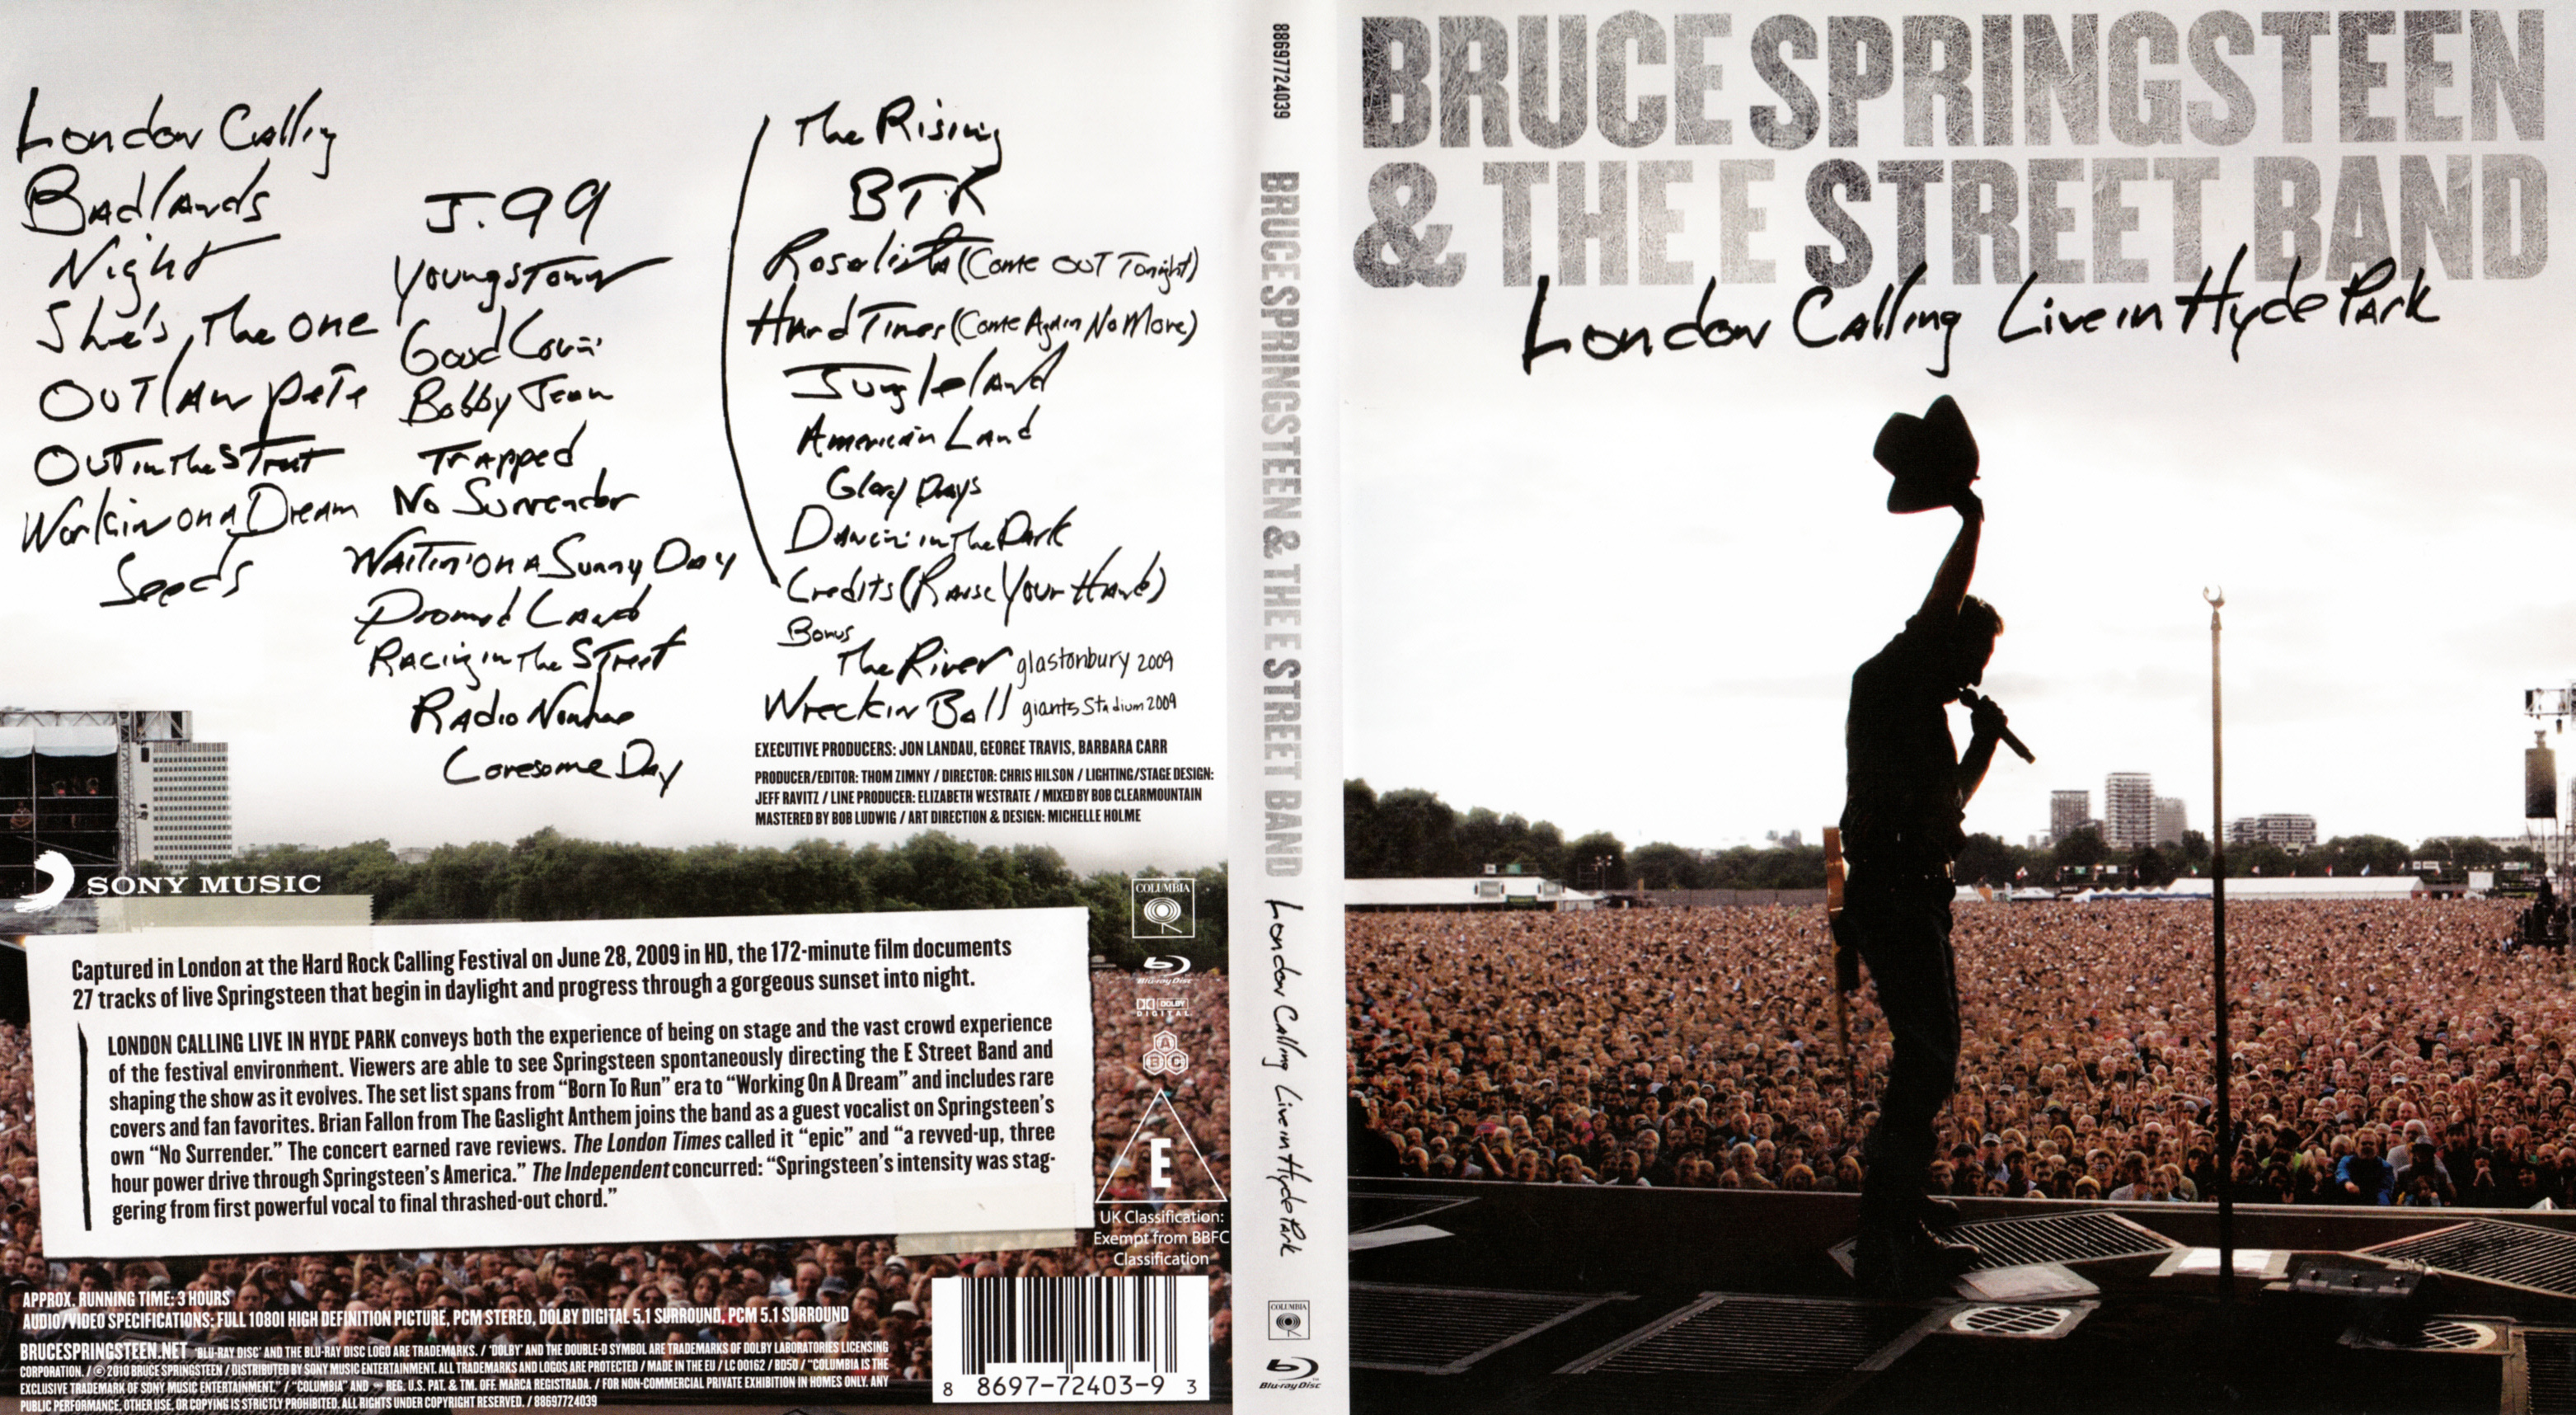 Jaquette DVD Bruce Springsteen & The E Street Band - London calling live in hyde park (BLU-RAY)